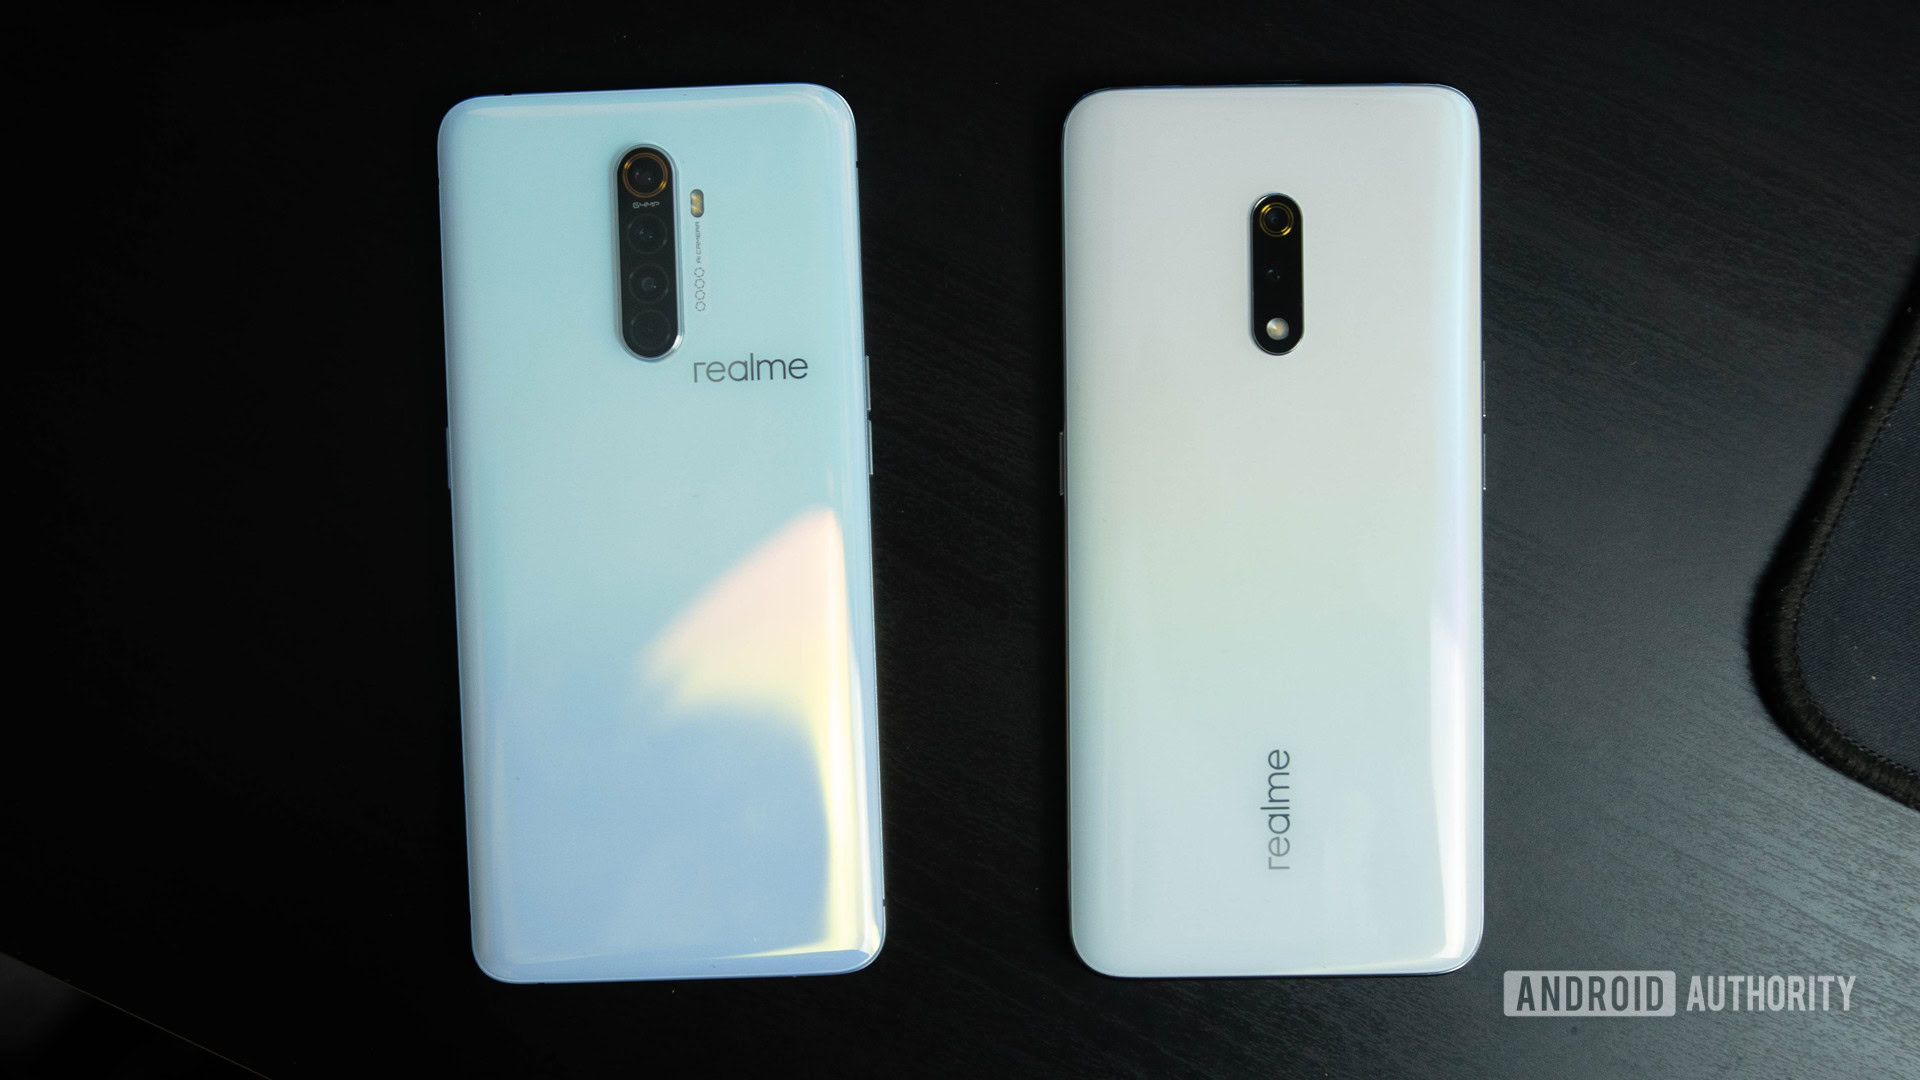 realme X2 Pro review: The best value smartphone around? - Android